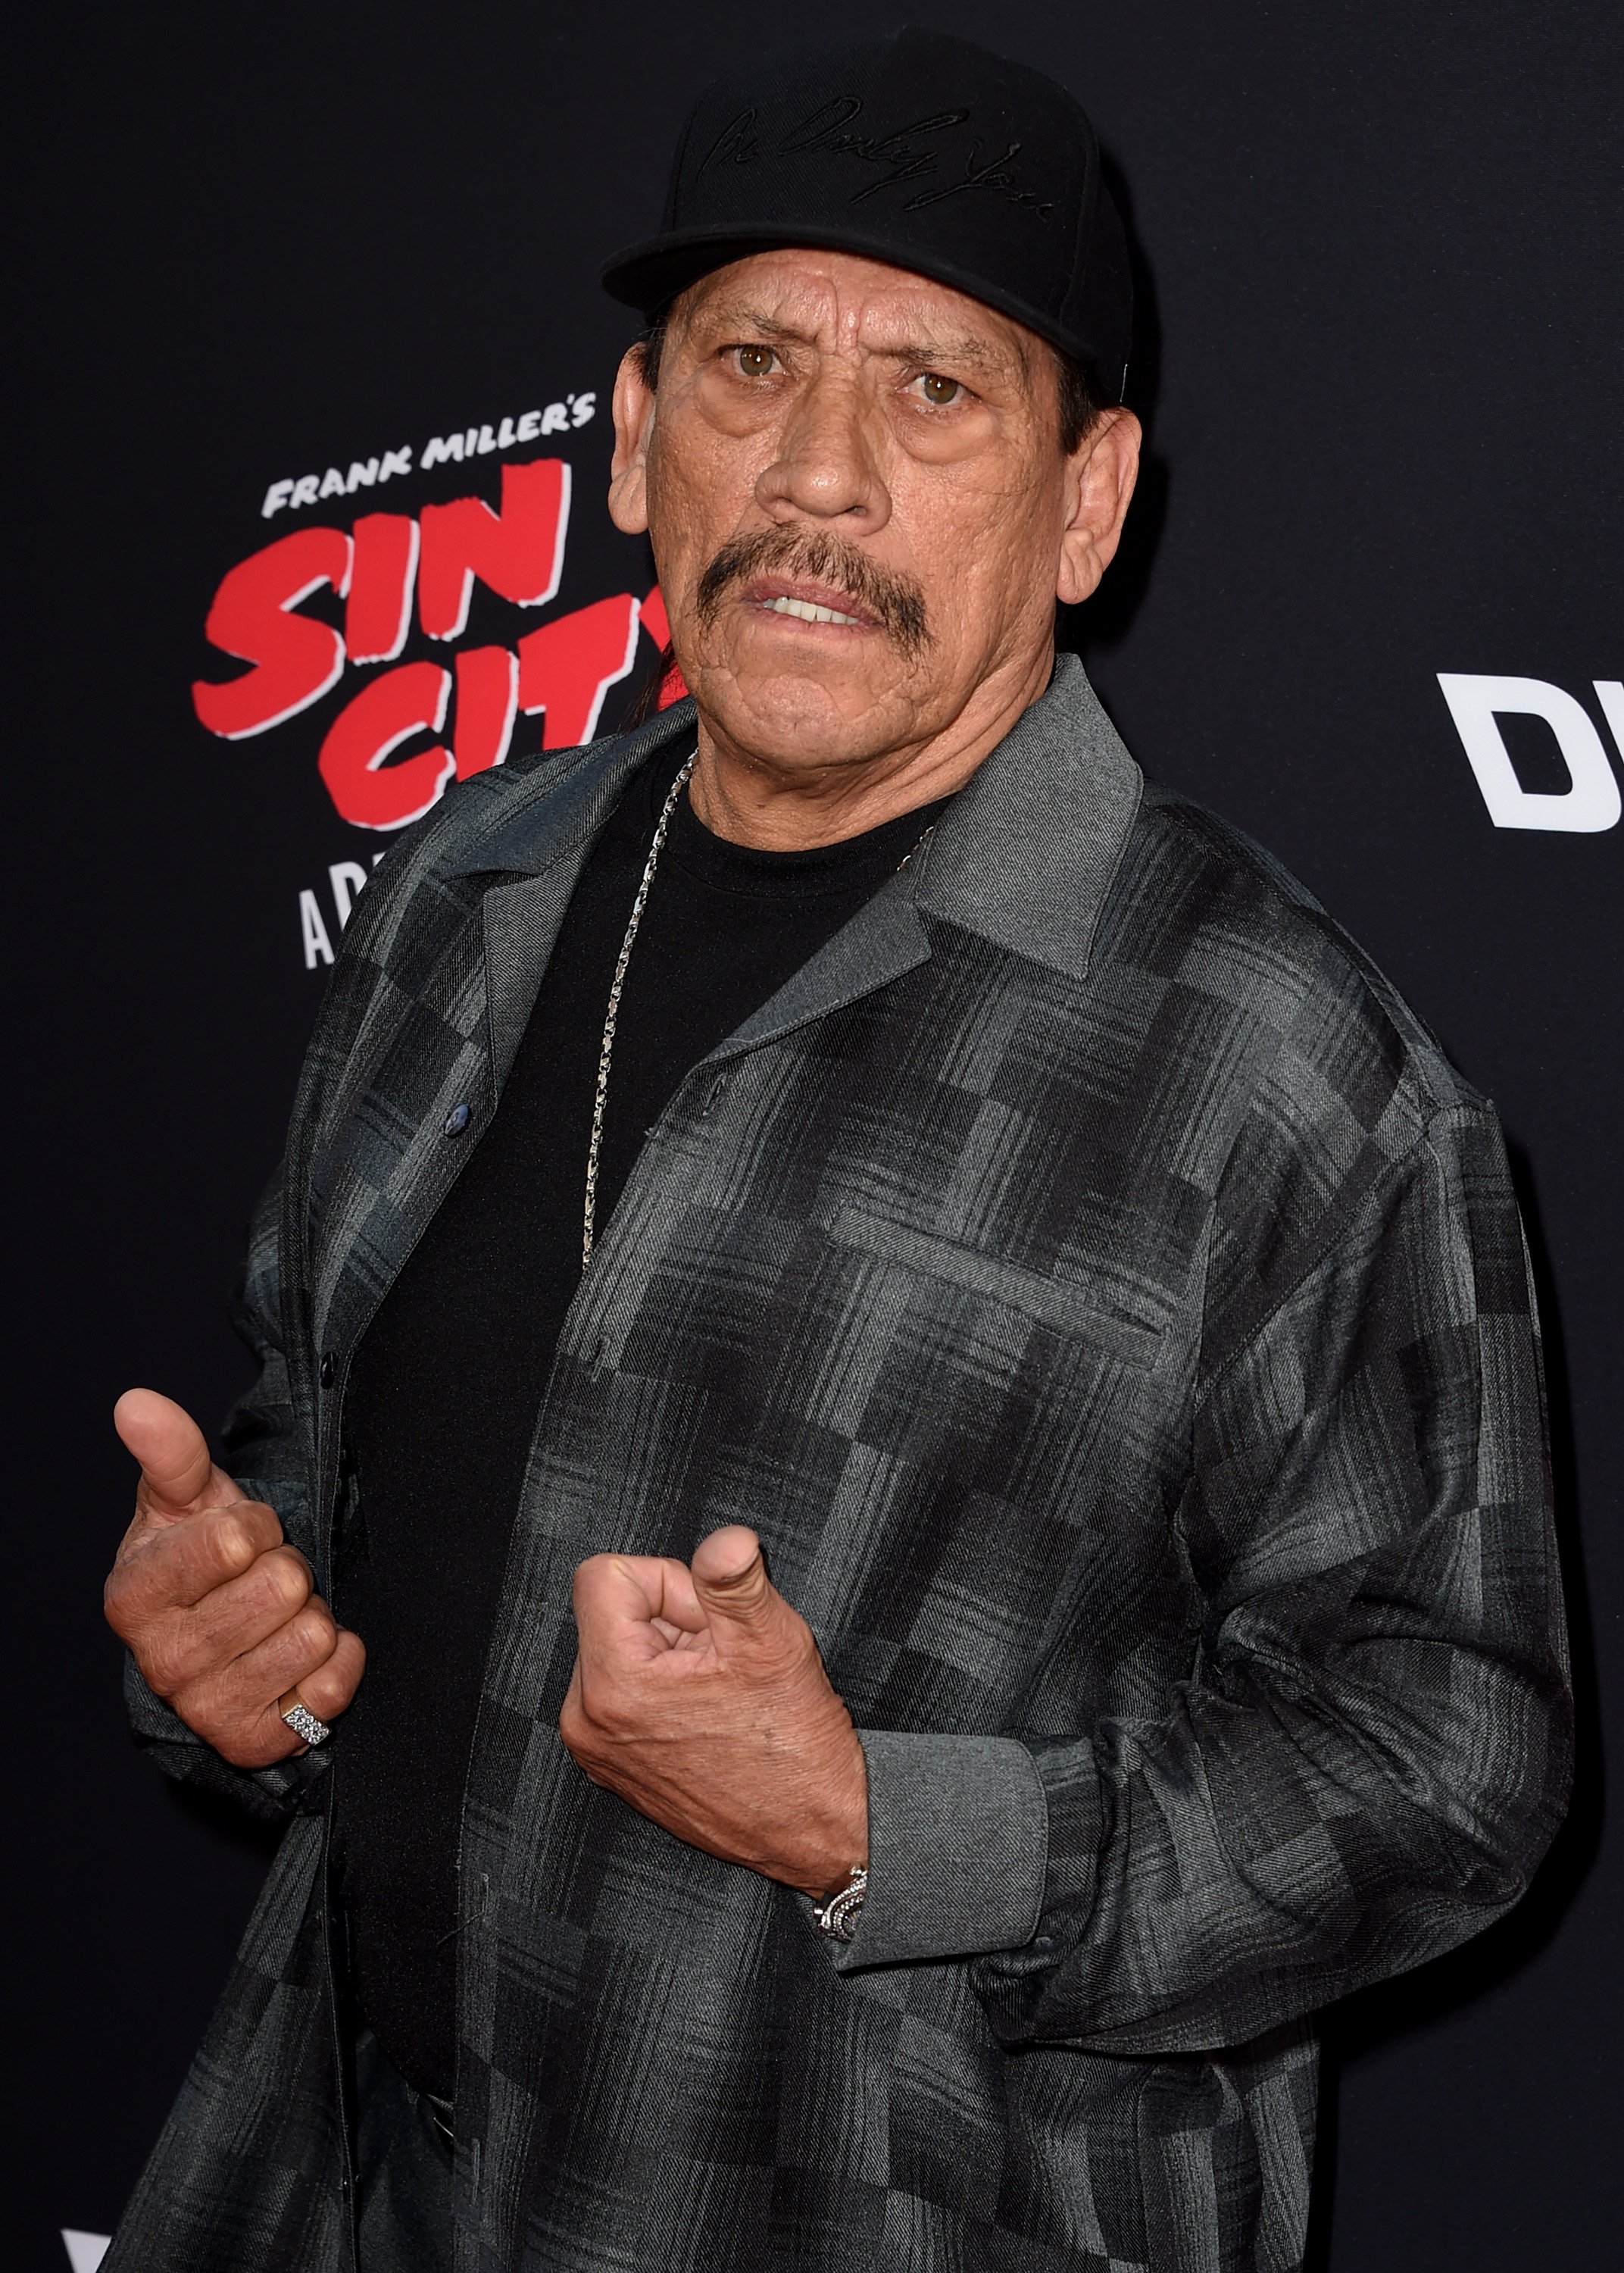 Danny Trejo at the "Sin City: A Dame To Kill” on August 19, 2014 in Hollywood. | Source: Getty Images